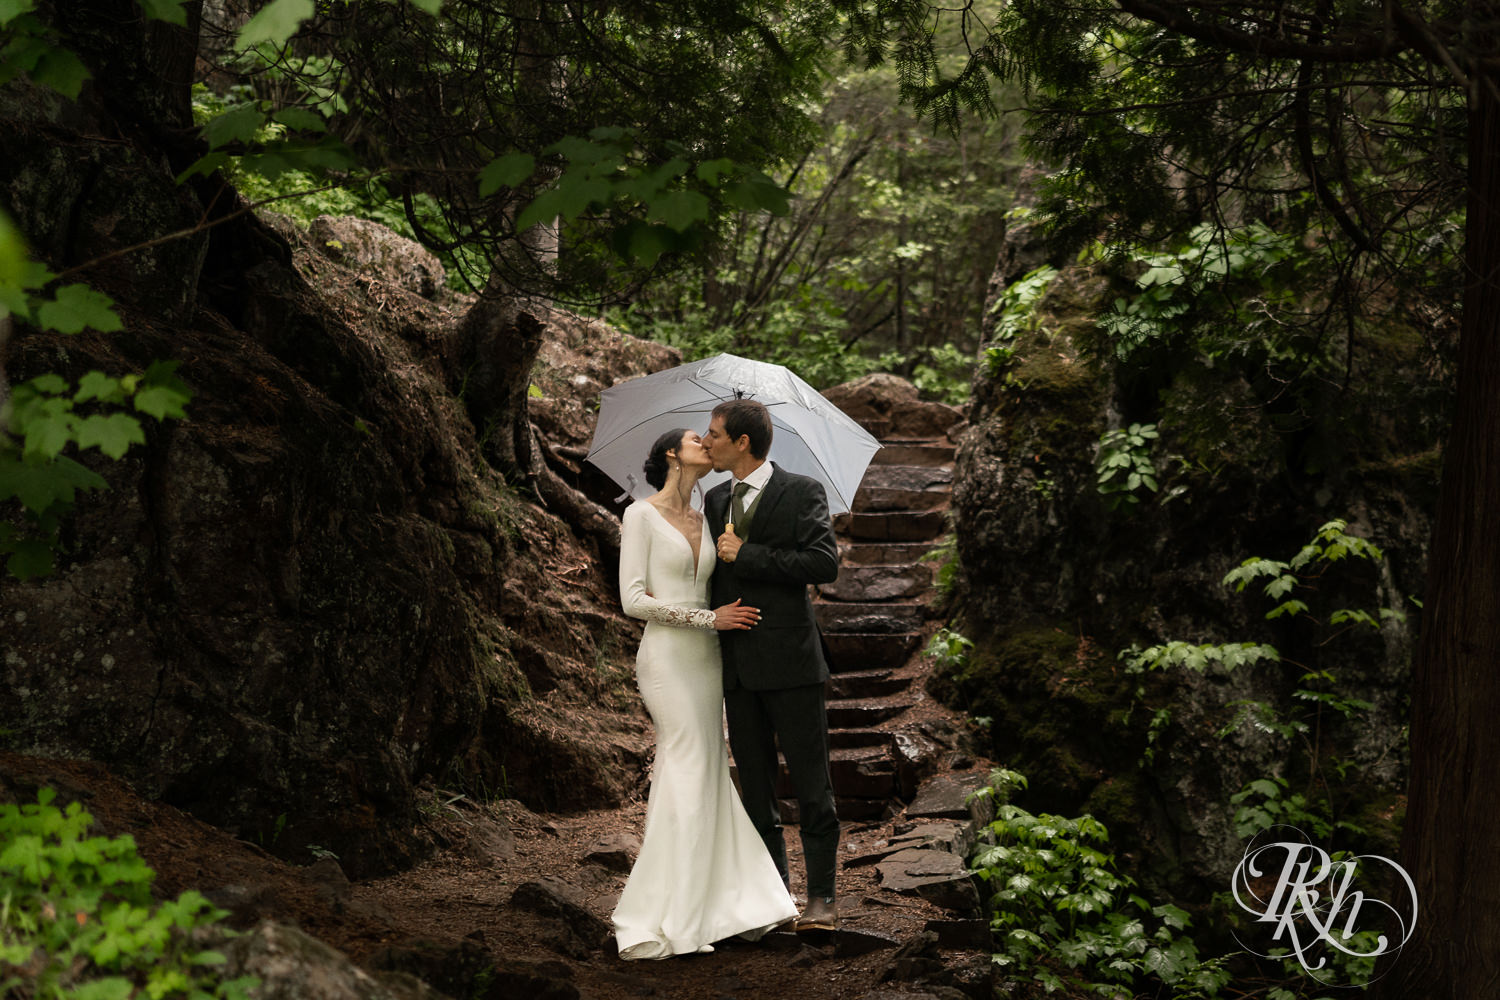 Bride and groom kiss in rain at their North Shore elopement in Tofte, Minnesota.